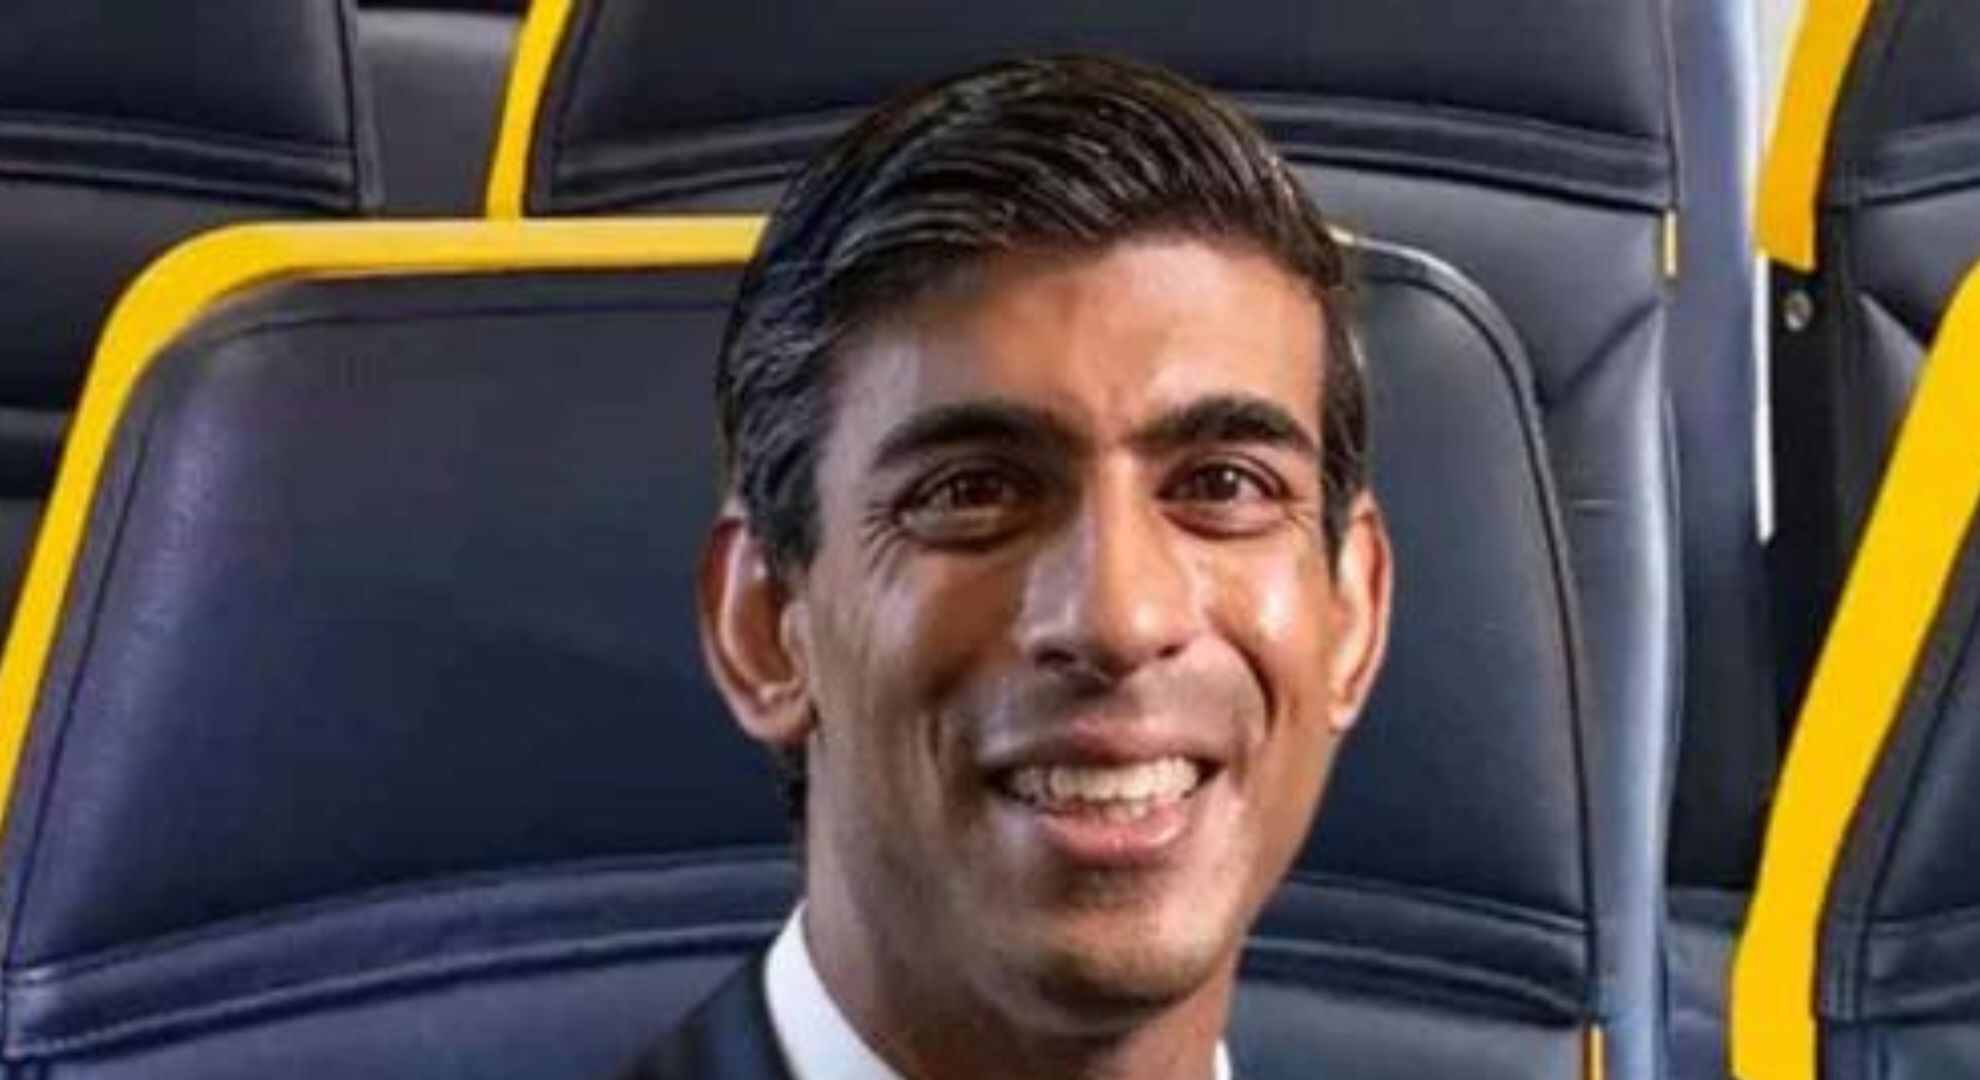 ‘Don’t Worry Rishi Sunak’: Ryanair Offers Seat After Election Defeat